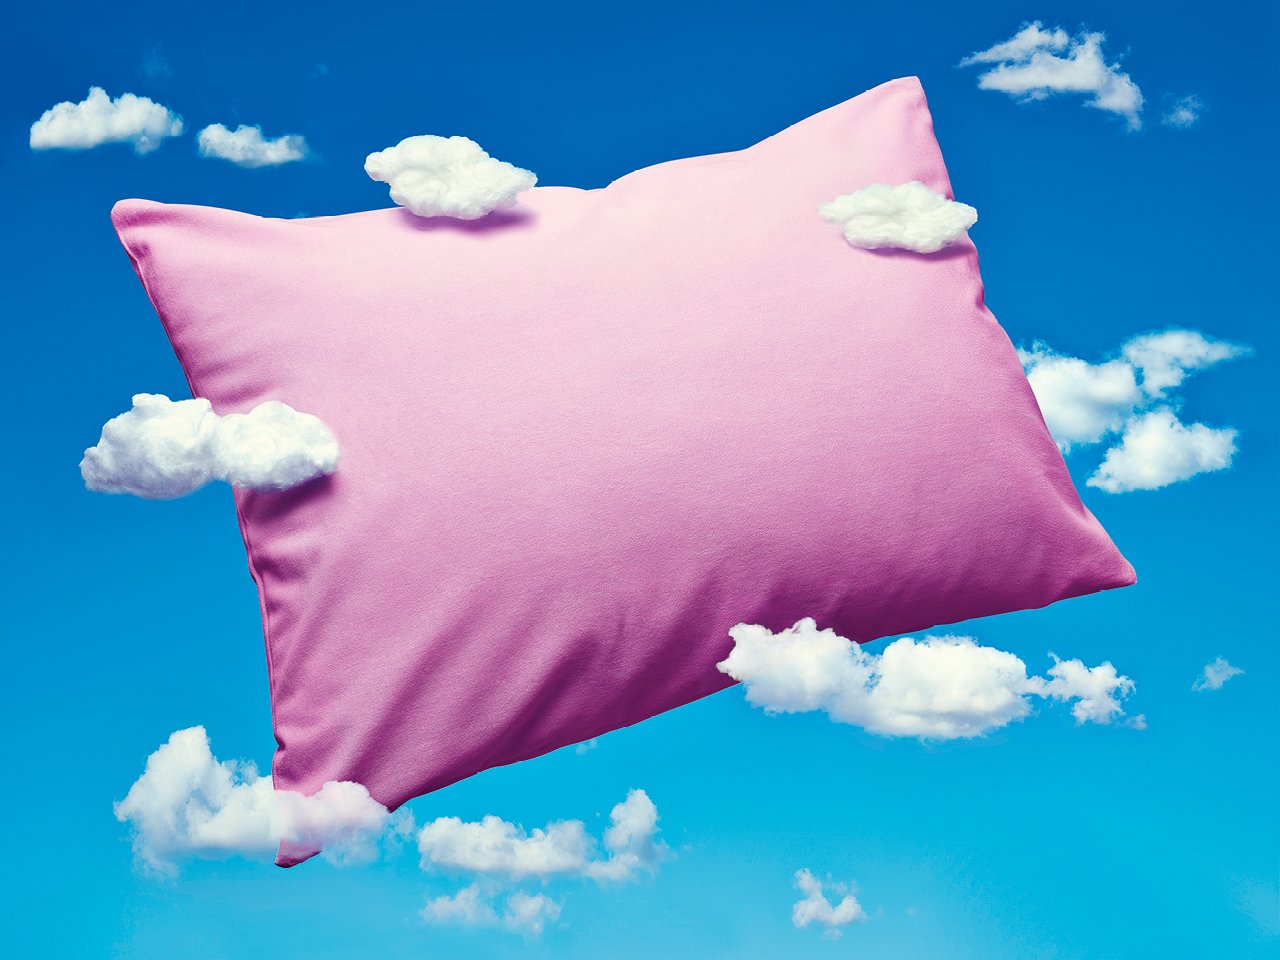 A photo illustration of a pink pillow floating through the clouds